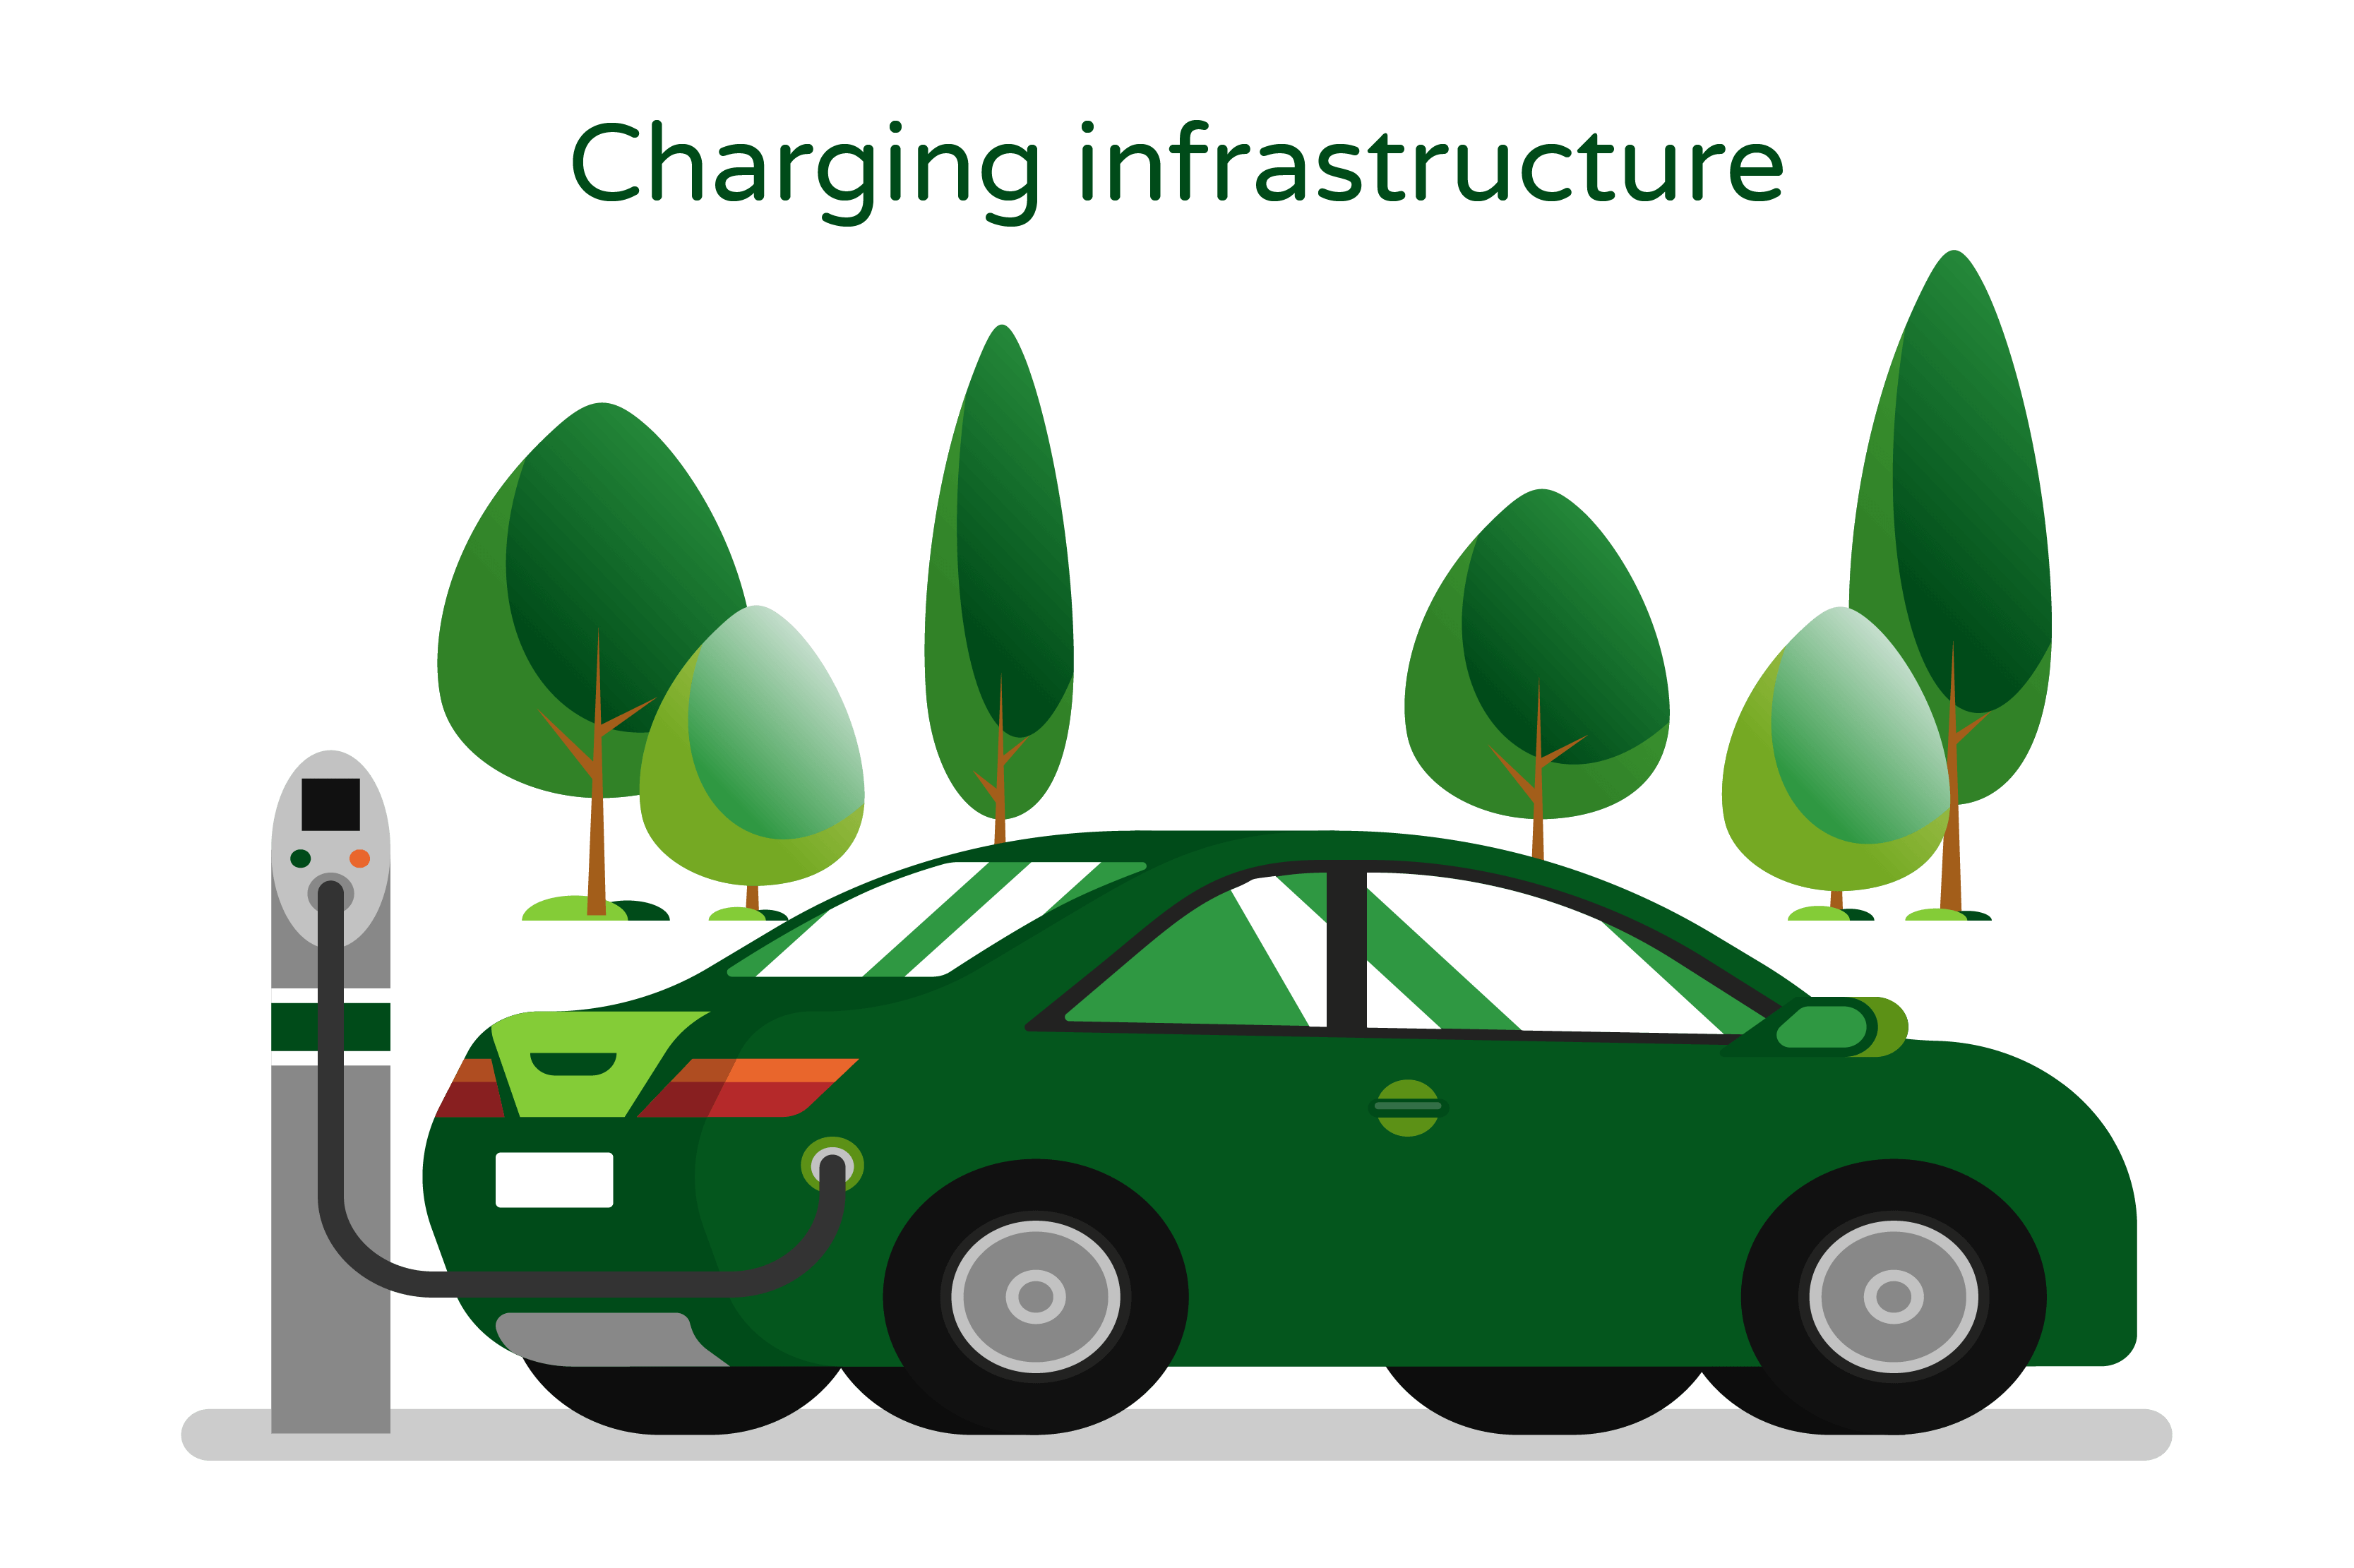 Illustration titled 'Charging Infrastructure.' The illustration depicts an electric car, colored in green, connected to a green-colored charging pole. The illustration symbolizes the charging process and the presence of charging infrastructure for electric vehicles.  The illustration represents the concept of electric vehicle charging, emphasizing the connection between the car and the charging pole. It highlights the significance of charging infrastructure in supporting the widespread use of electric cars.  The green color of both the car and the charging pole signifies the eco-friendly nature of electric vehicles and their contribution to sustainable transportation.  The illustration visually communicates the idea of charging infrastructure for electric cars, showcasing the availability of charging stations and the development of infrastructure to facilitate the charging needs of electric vehicle owners.